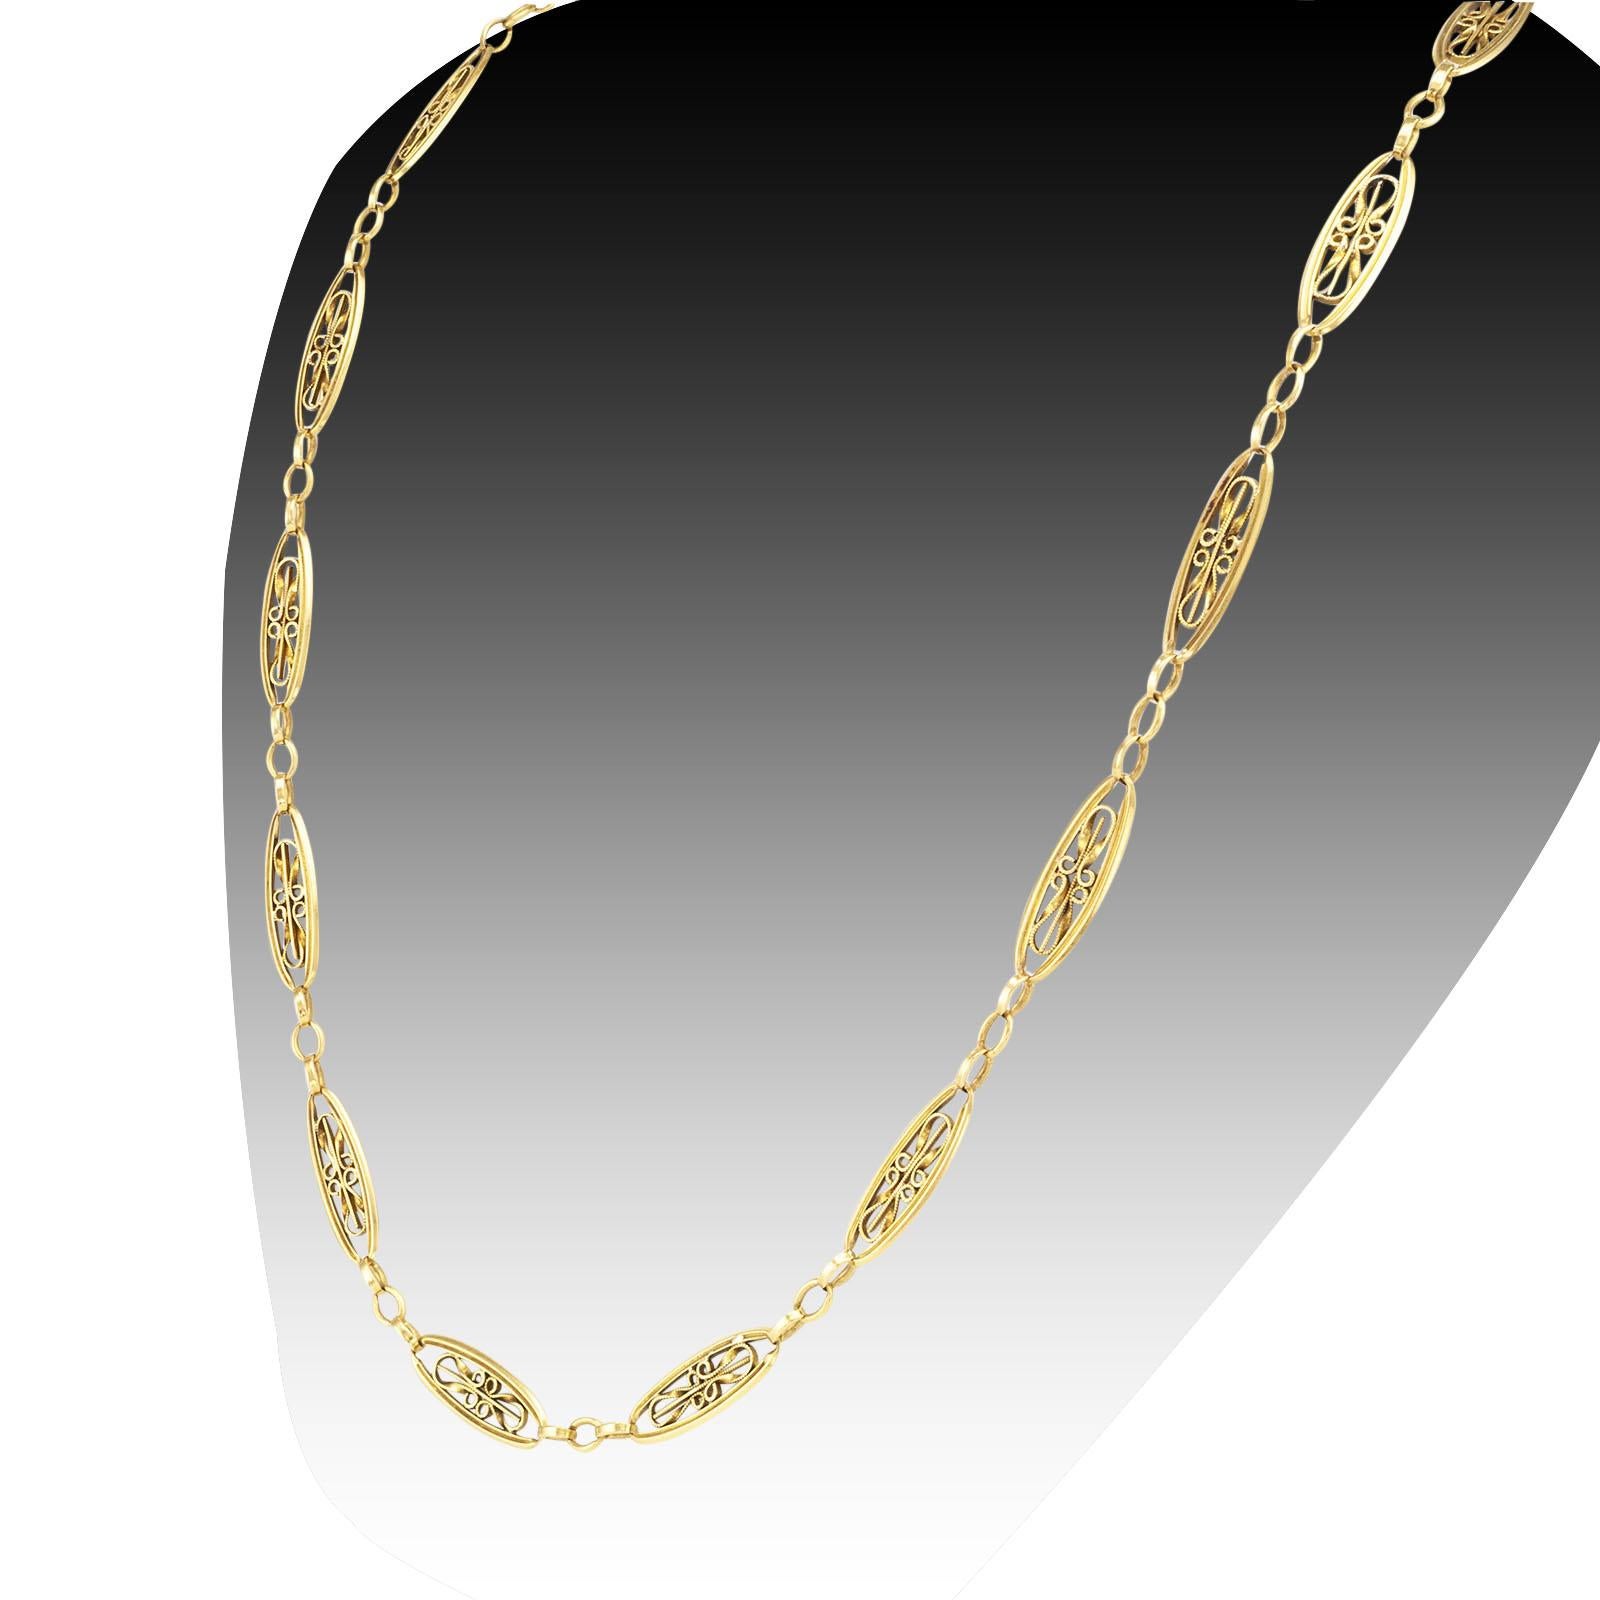 Art Nouveau French yellow gold chain necklace circa 1905. 

DETAILS:

METAL: 18-karat yellow gold.

MEASUREMENTS: approximately 21” (53.3 cm) long and 5/16” (7 mm) wide overall, 21.4 grams.

HALLMARKS: French.

CONDITION: high magnification